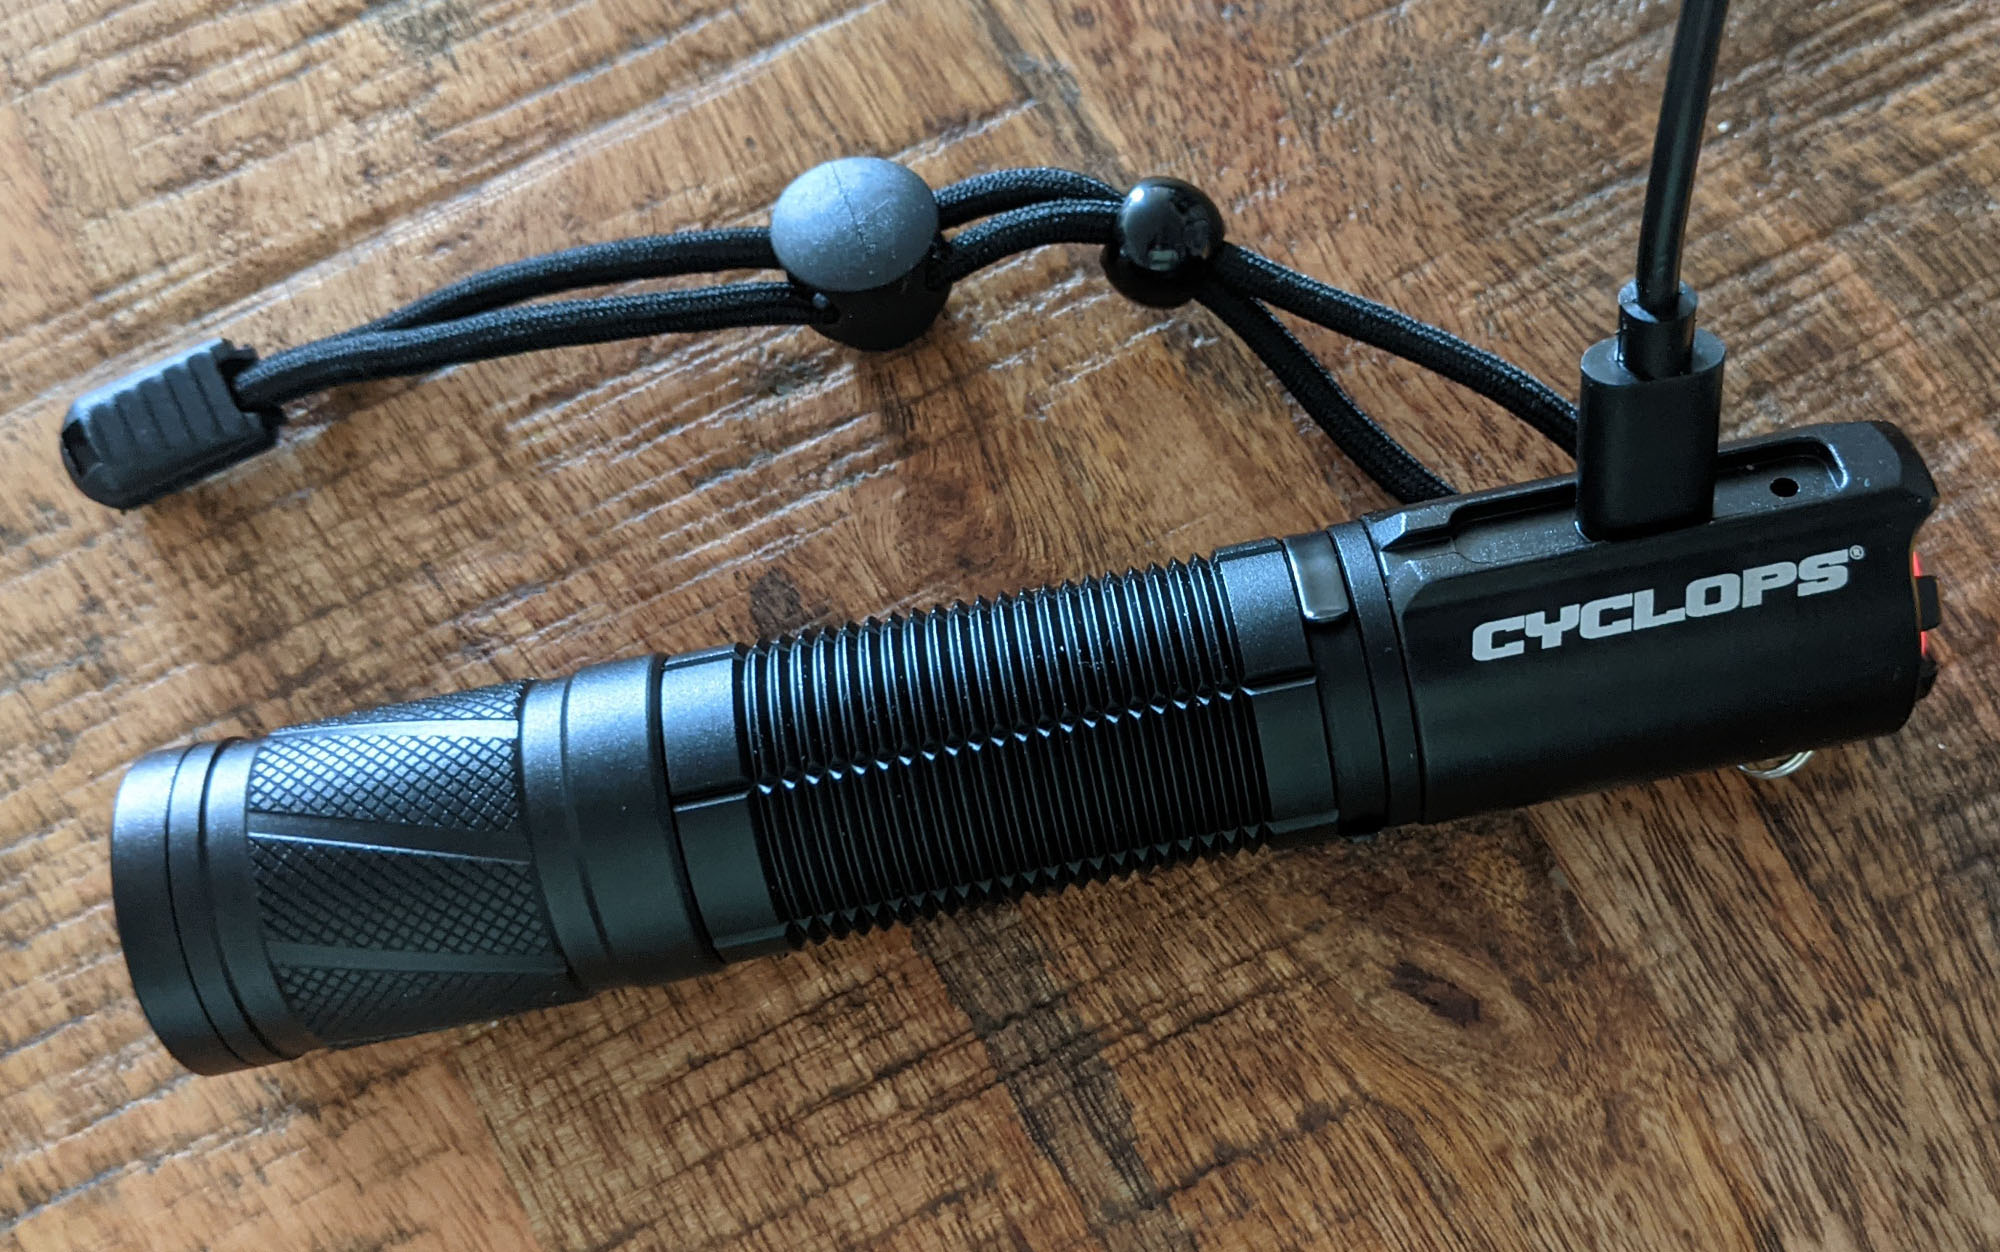 The Cyclops FX1200 is the brightest flashlight.